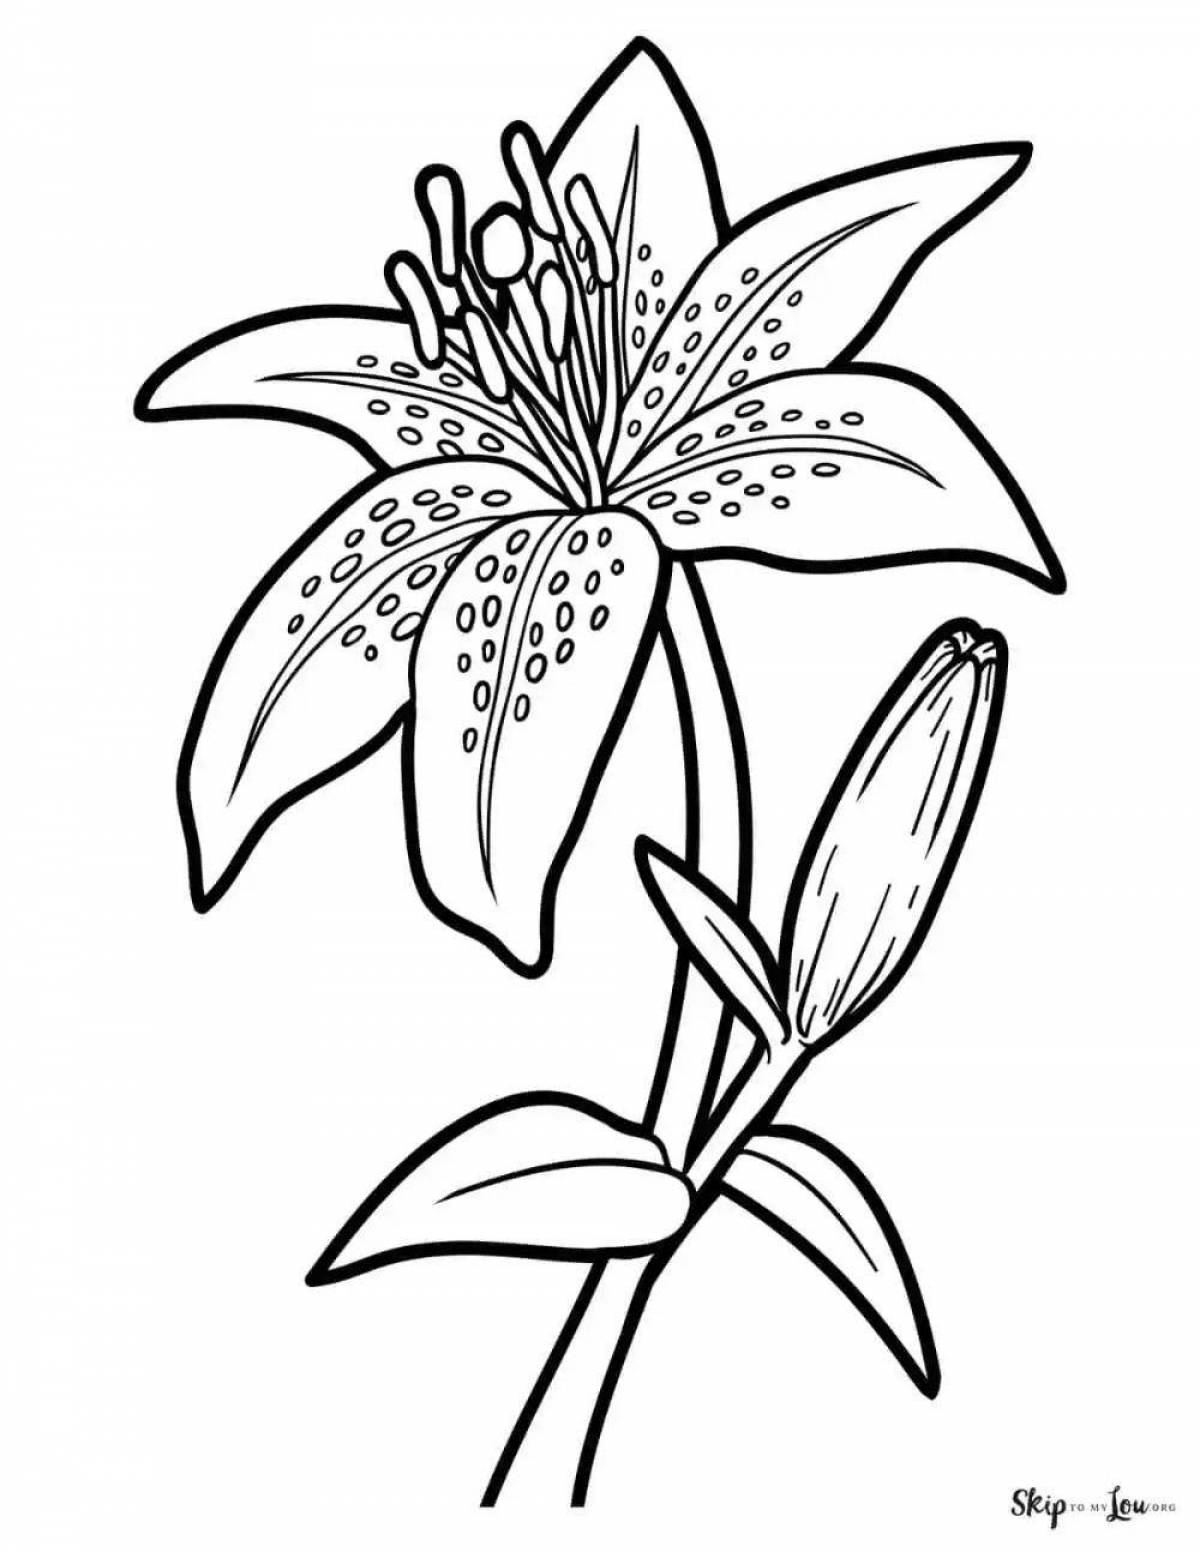 Adorable lily coloring pages for kids